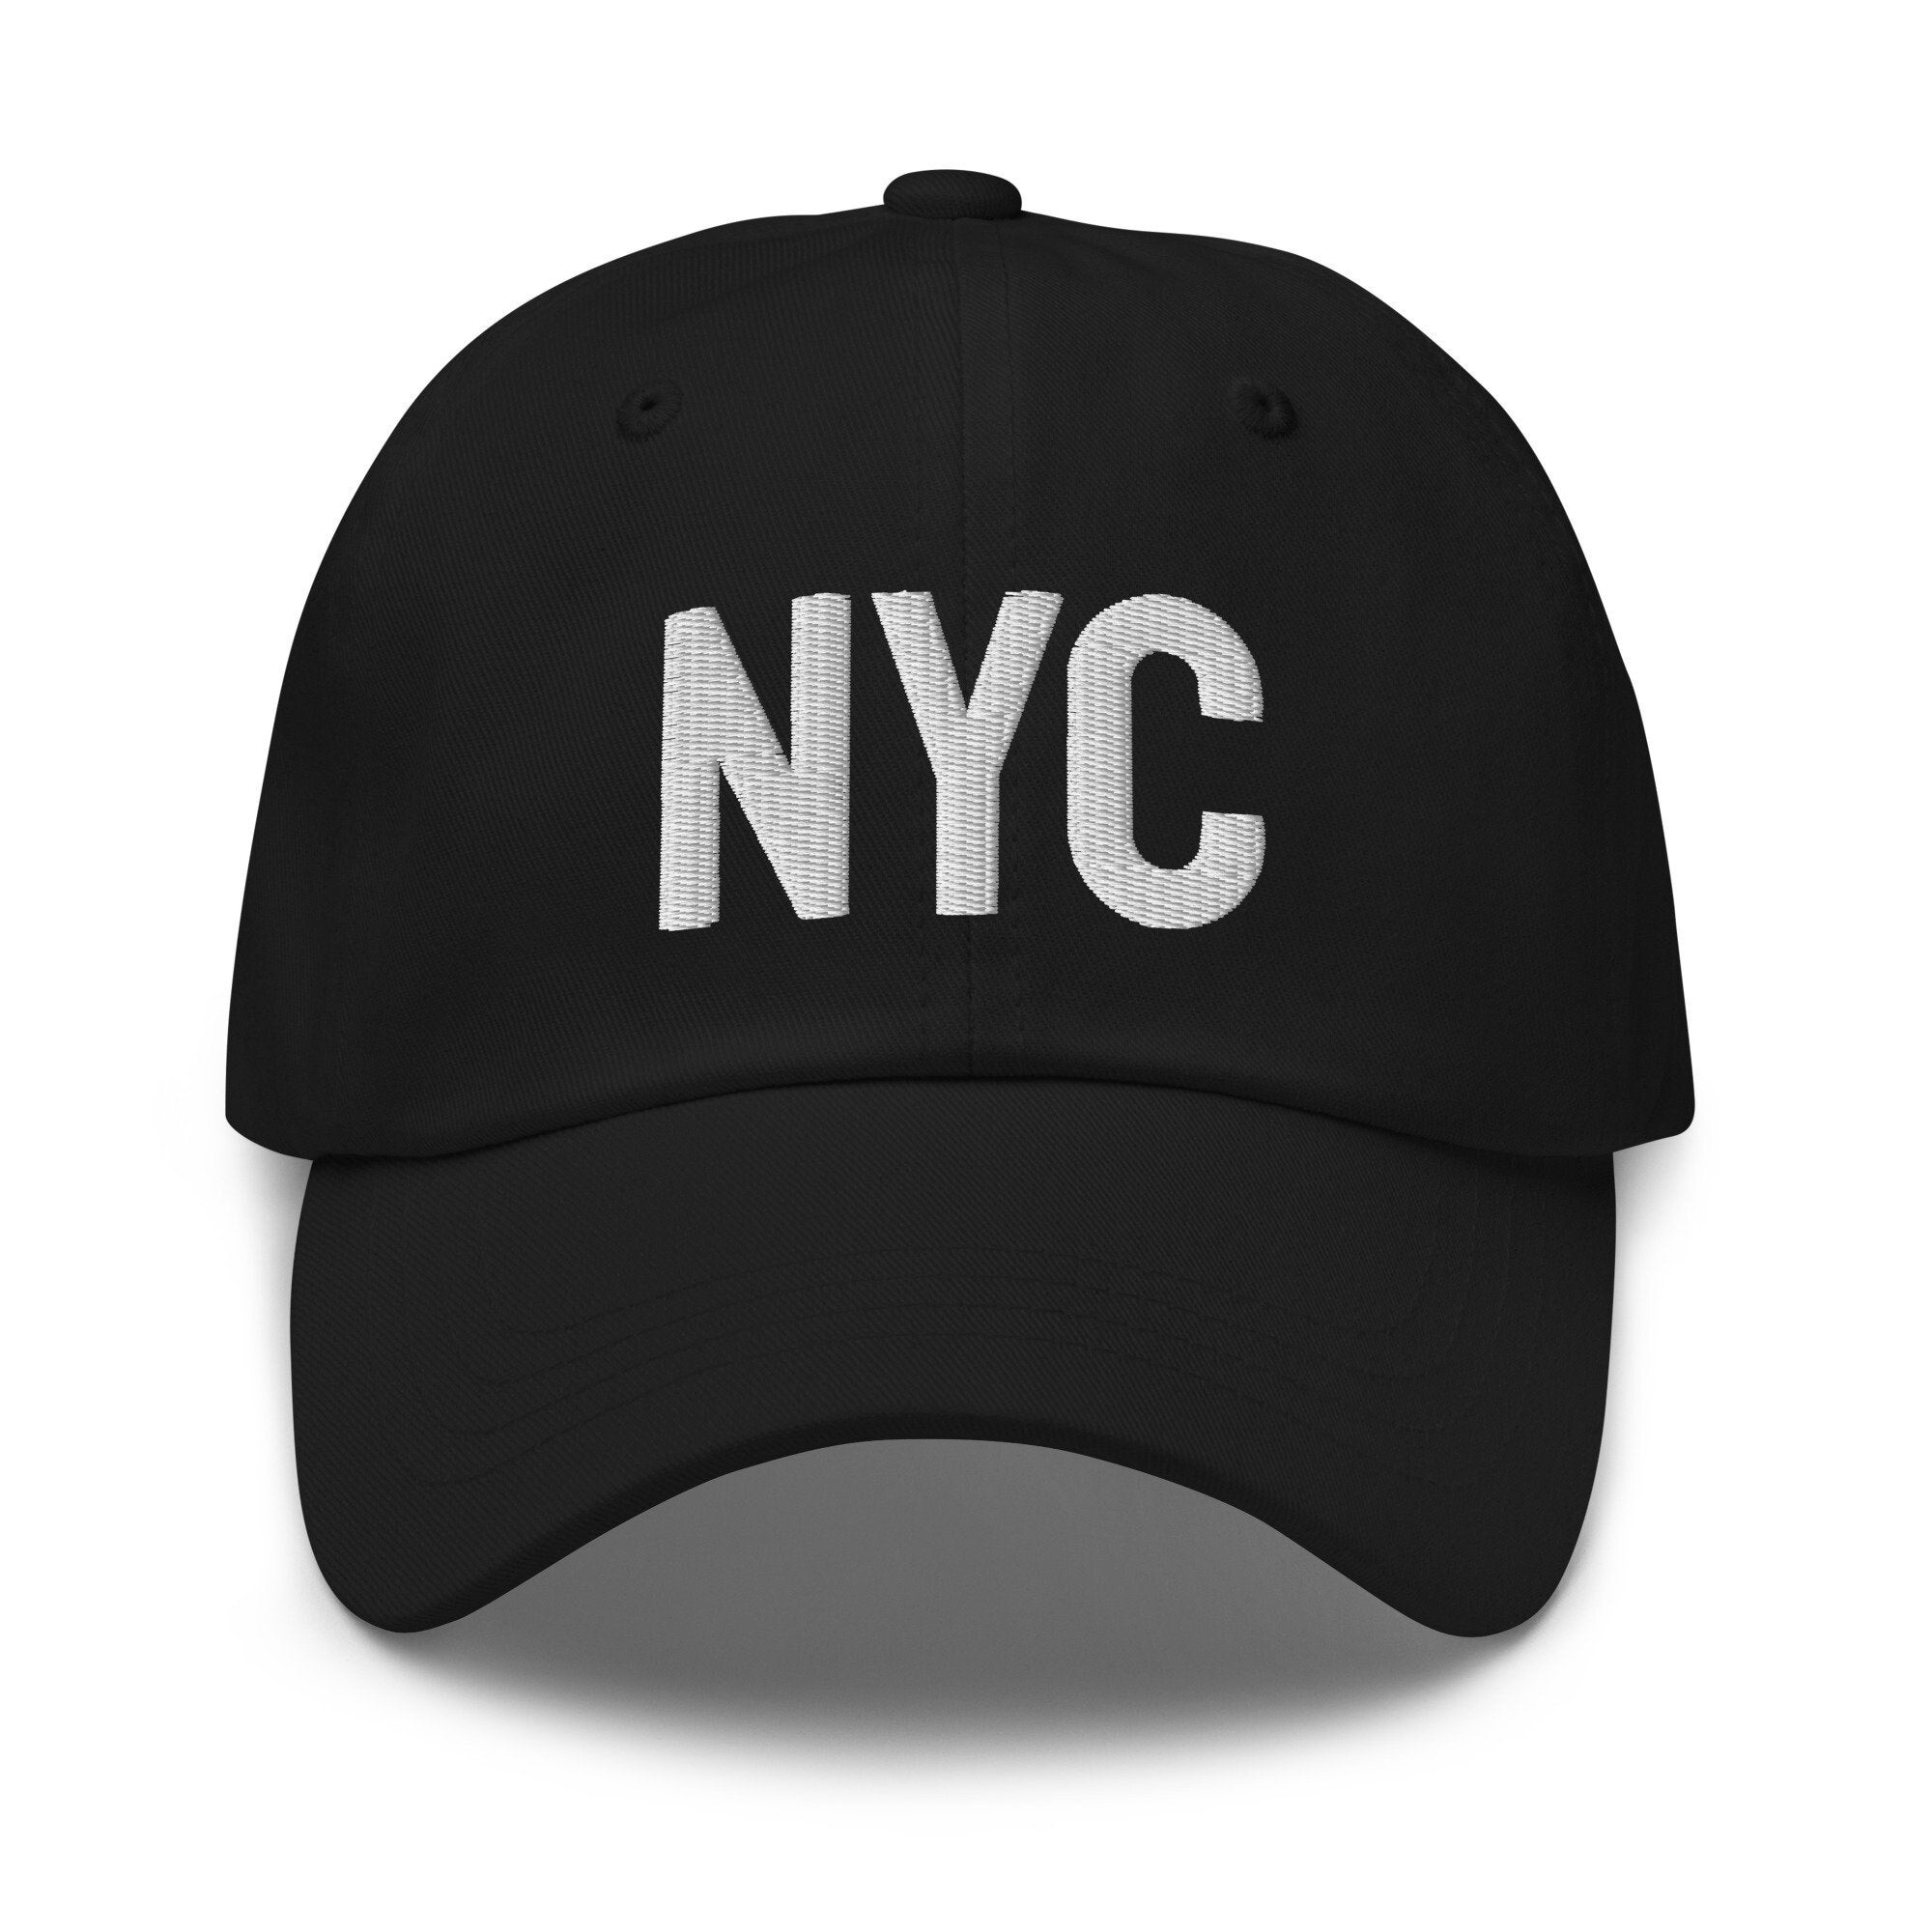 NYC Embroidered Dad Hat New York City Baseball Cap Airport - Etsy